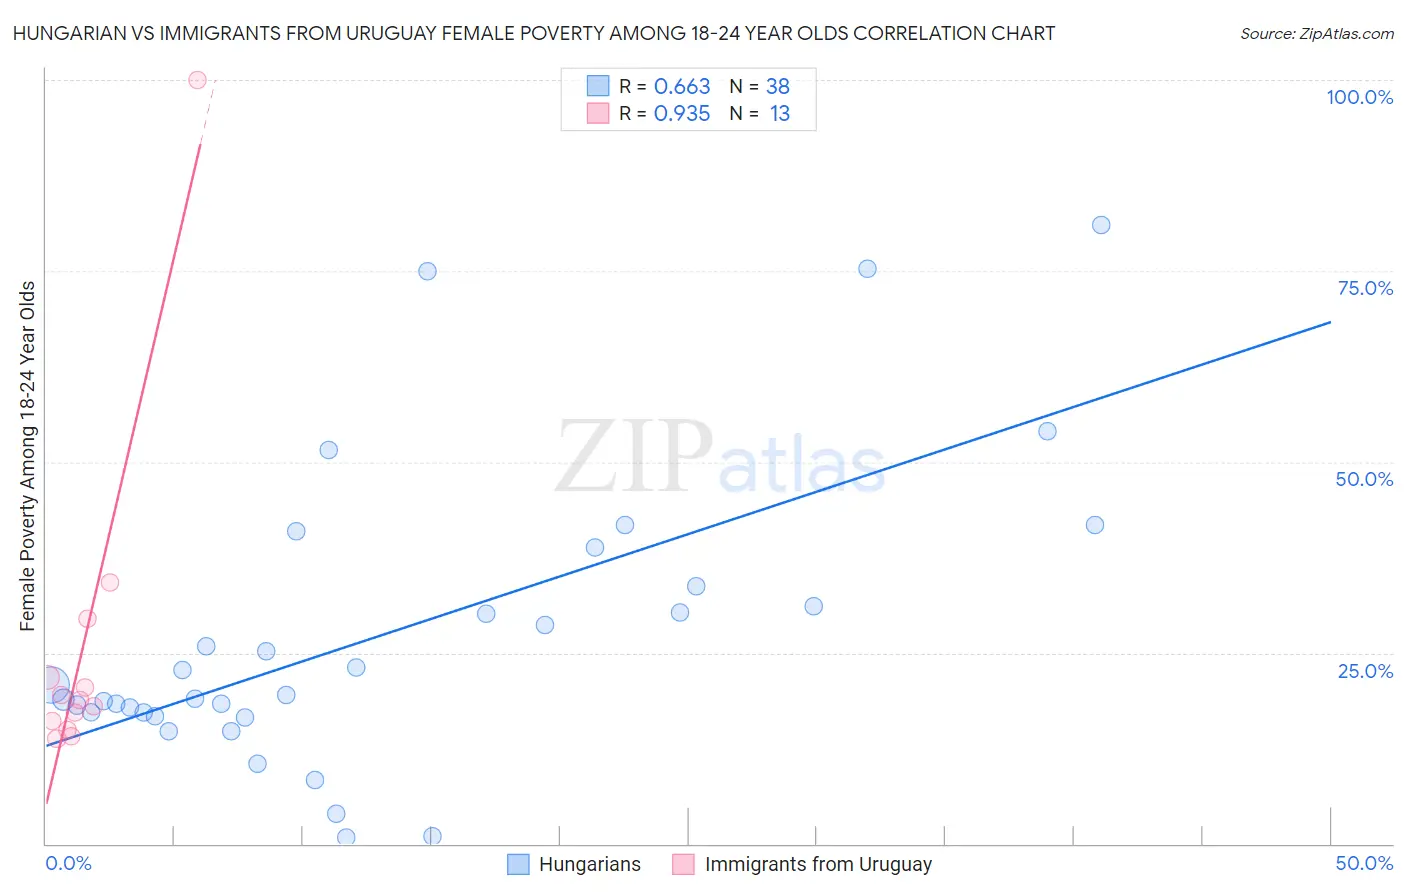 Hungarian vs Immigrants from Uruguay Female Poverty Among 18-24 Year Olds